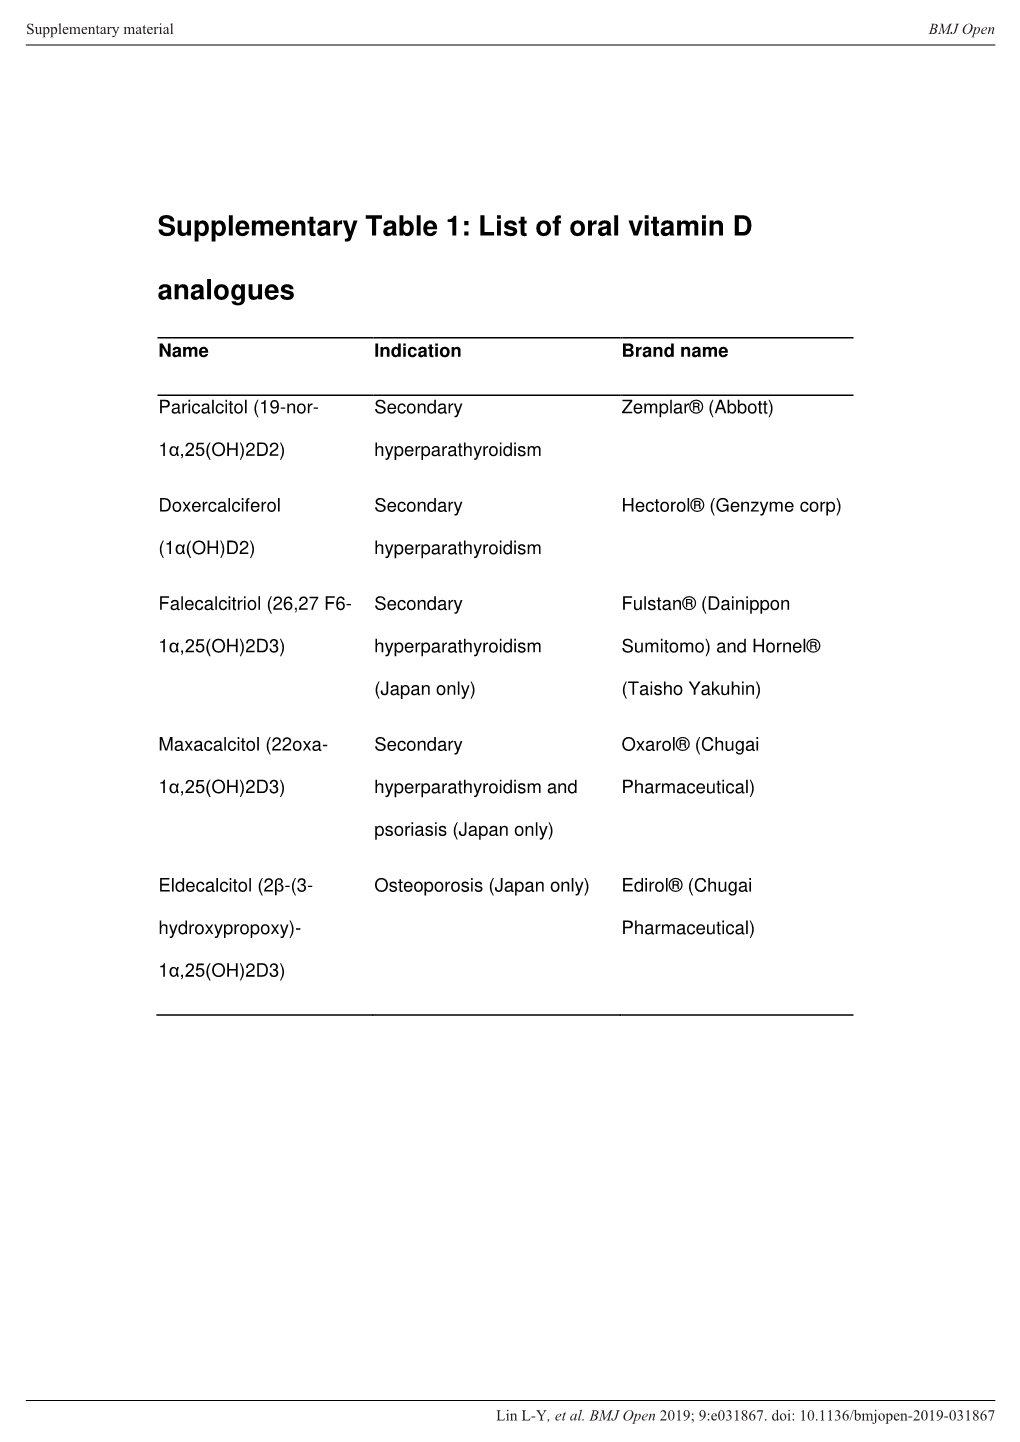 Supplementary Table 1: List of Oral Vitamin D